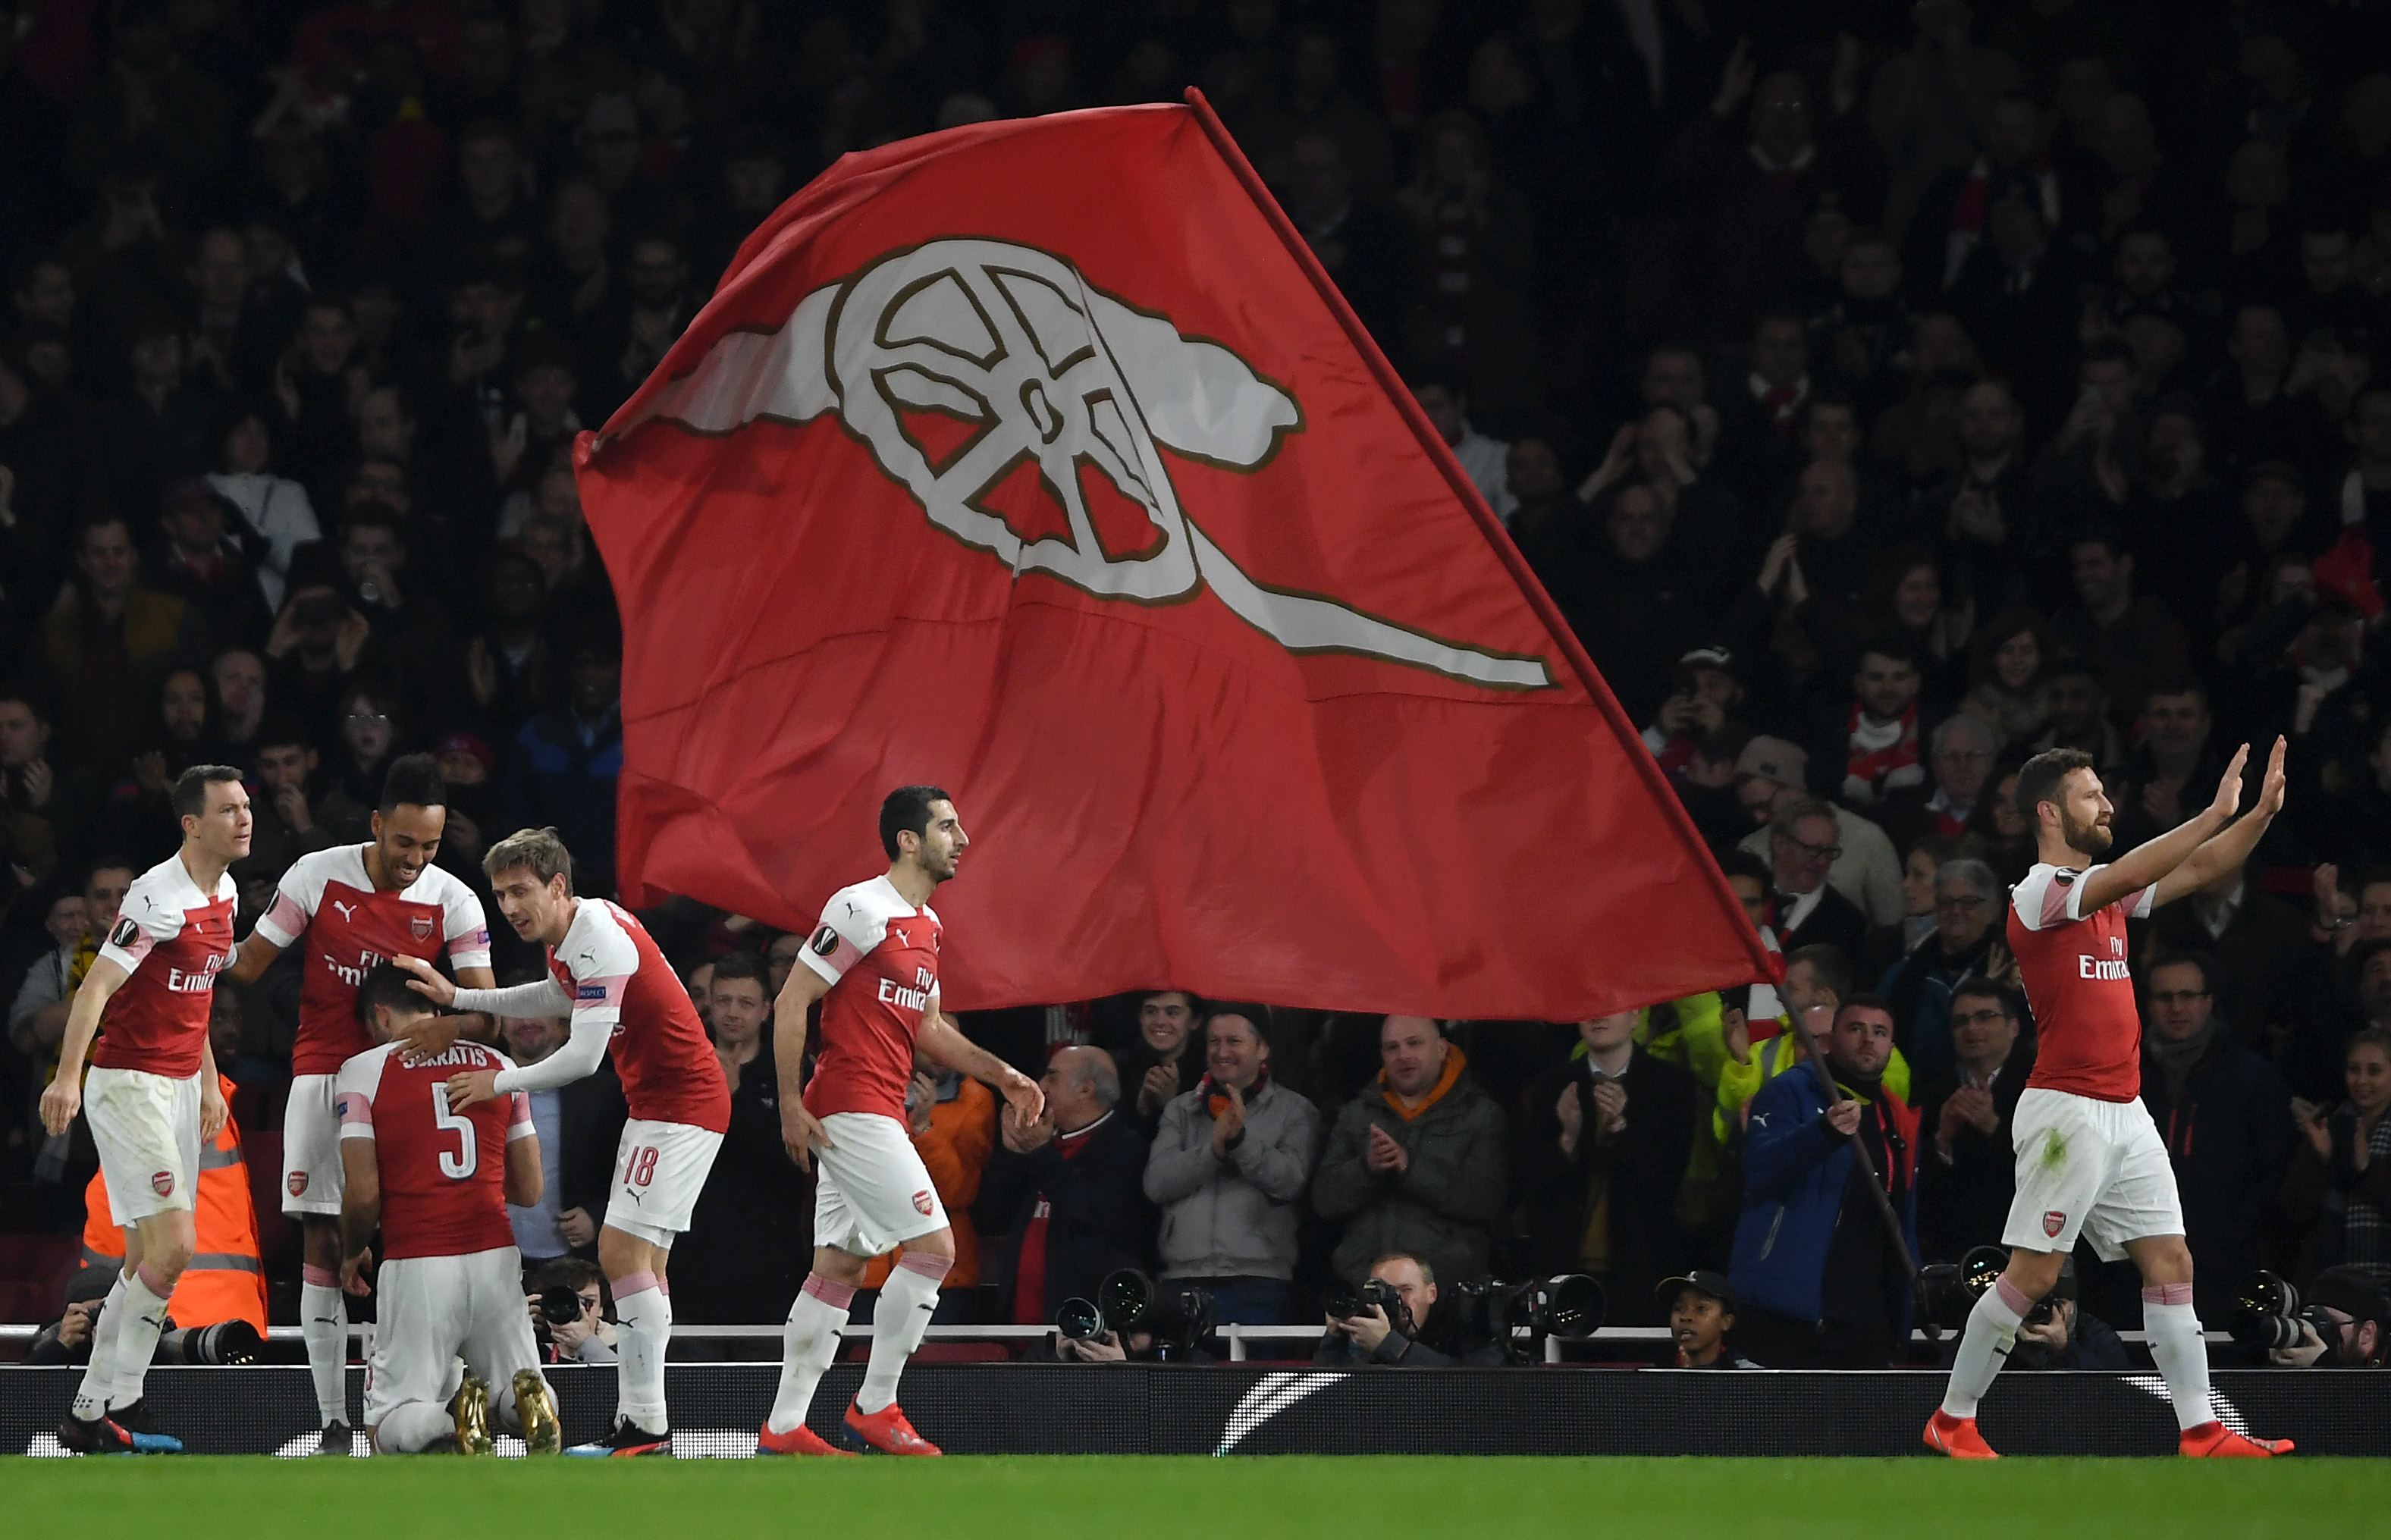 LONDON, ENGLAND - FEBRUARY 21: Sokratis Papastathopoulos of Arsenal celebrates with teammates after scoring his team's third goal during the UEFA Europa League Round of 32 Second Leg match between Arsenal and BATE Borisov at Emirates Stadium on February 21, 2019 in London, United Kingdom. (Photo by Mike Hewitt/Getty Images)